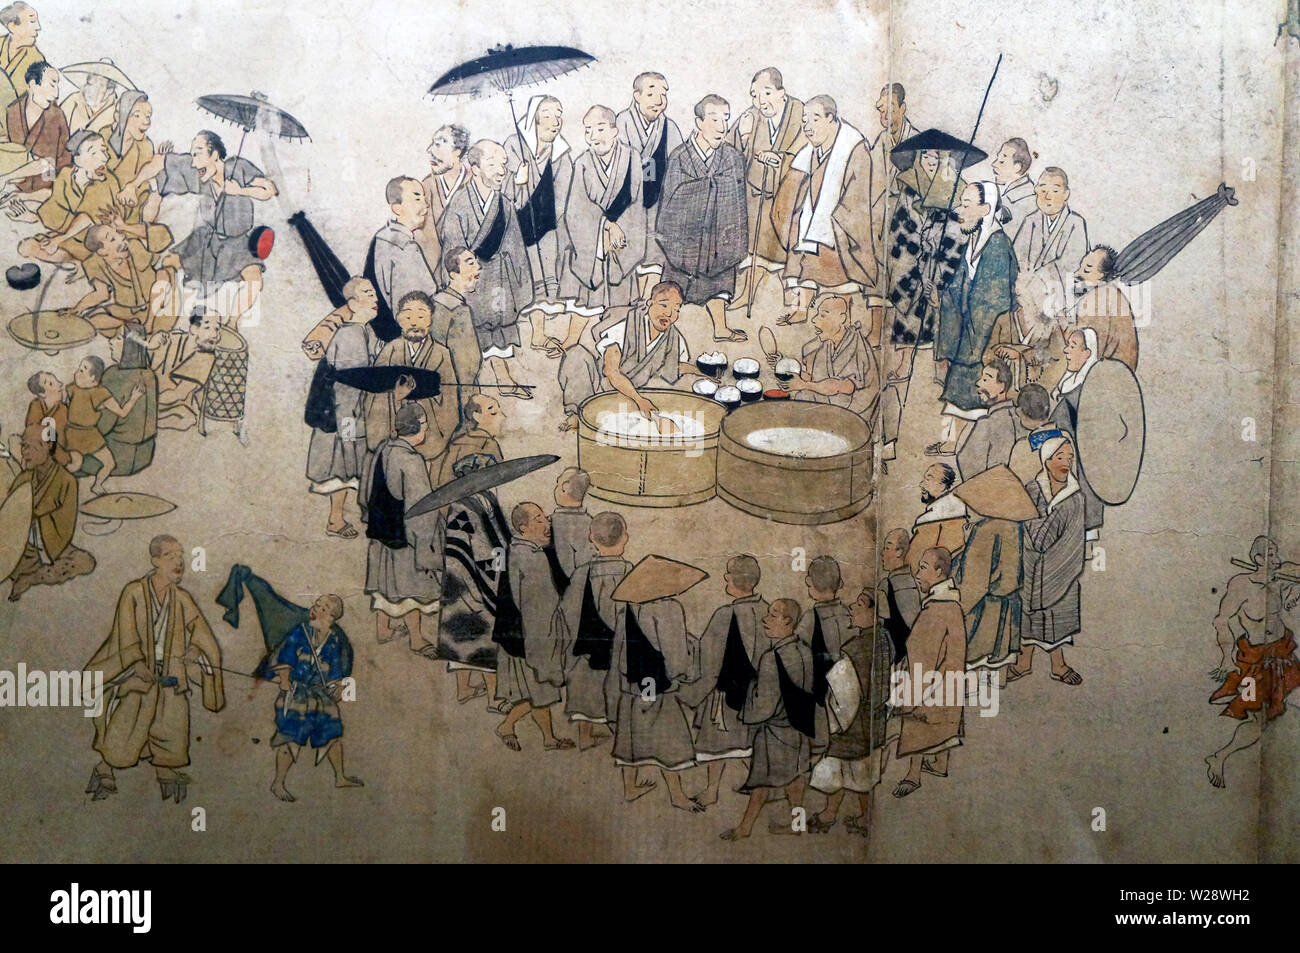 Feeding the monks, Illustrated Biography of Itinerant Priests, color on paper, Kamakura period, 14th century Stock Photo